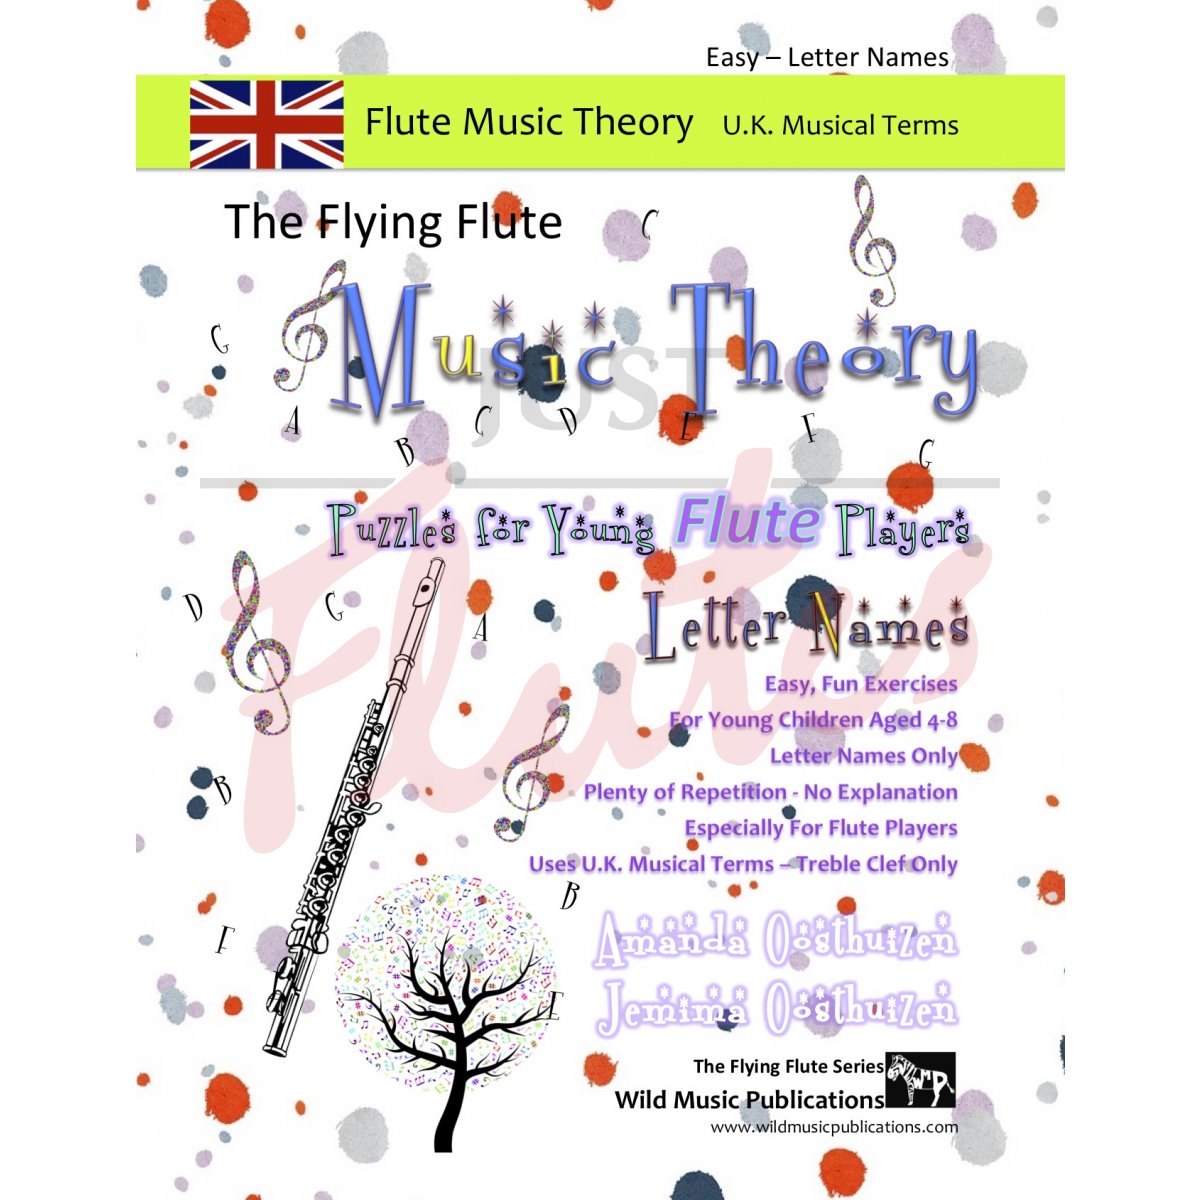 The Flying Flute Music Theory Puzzles for Young Flute Players - Letter Names